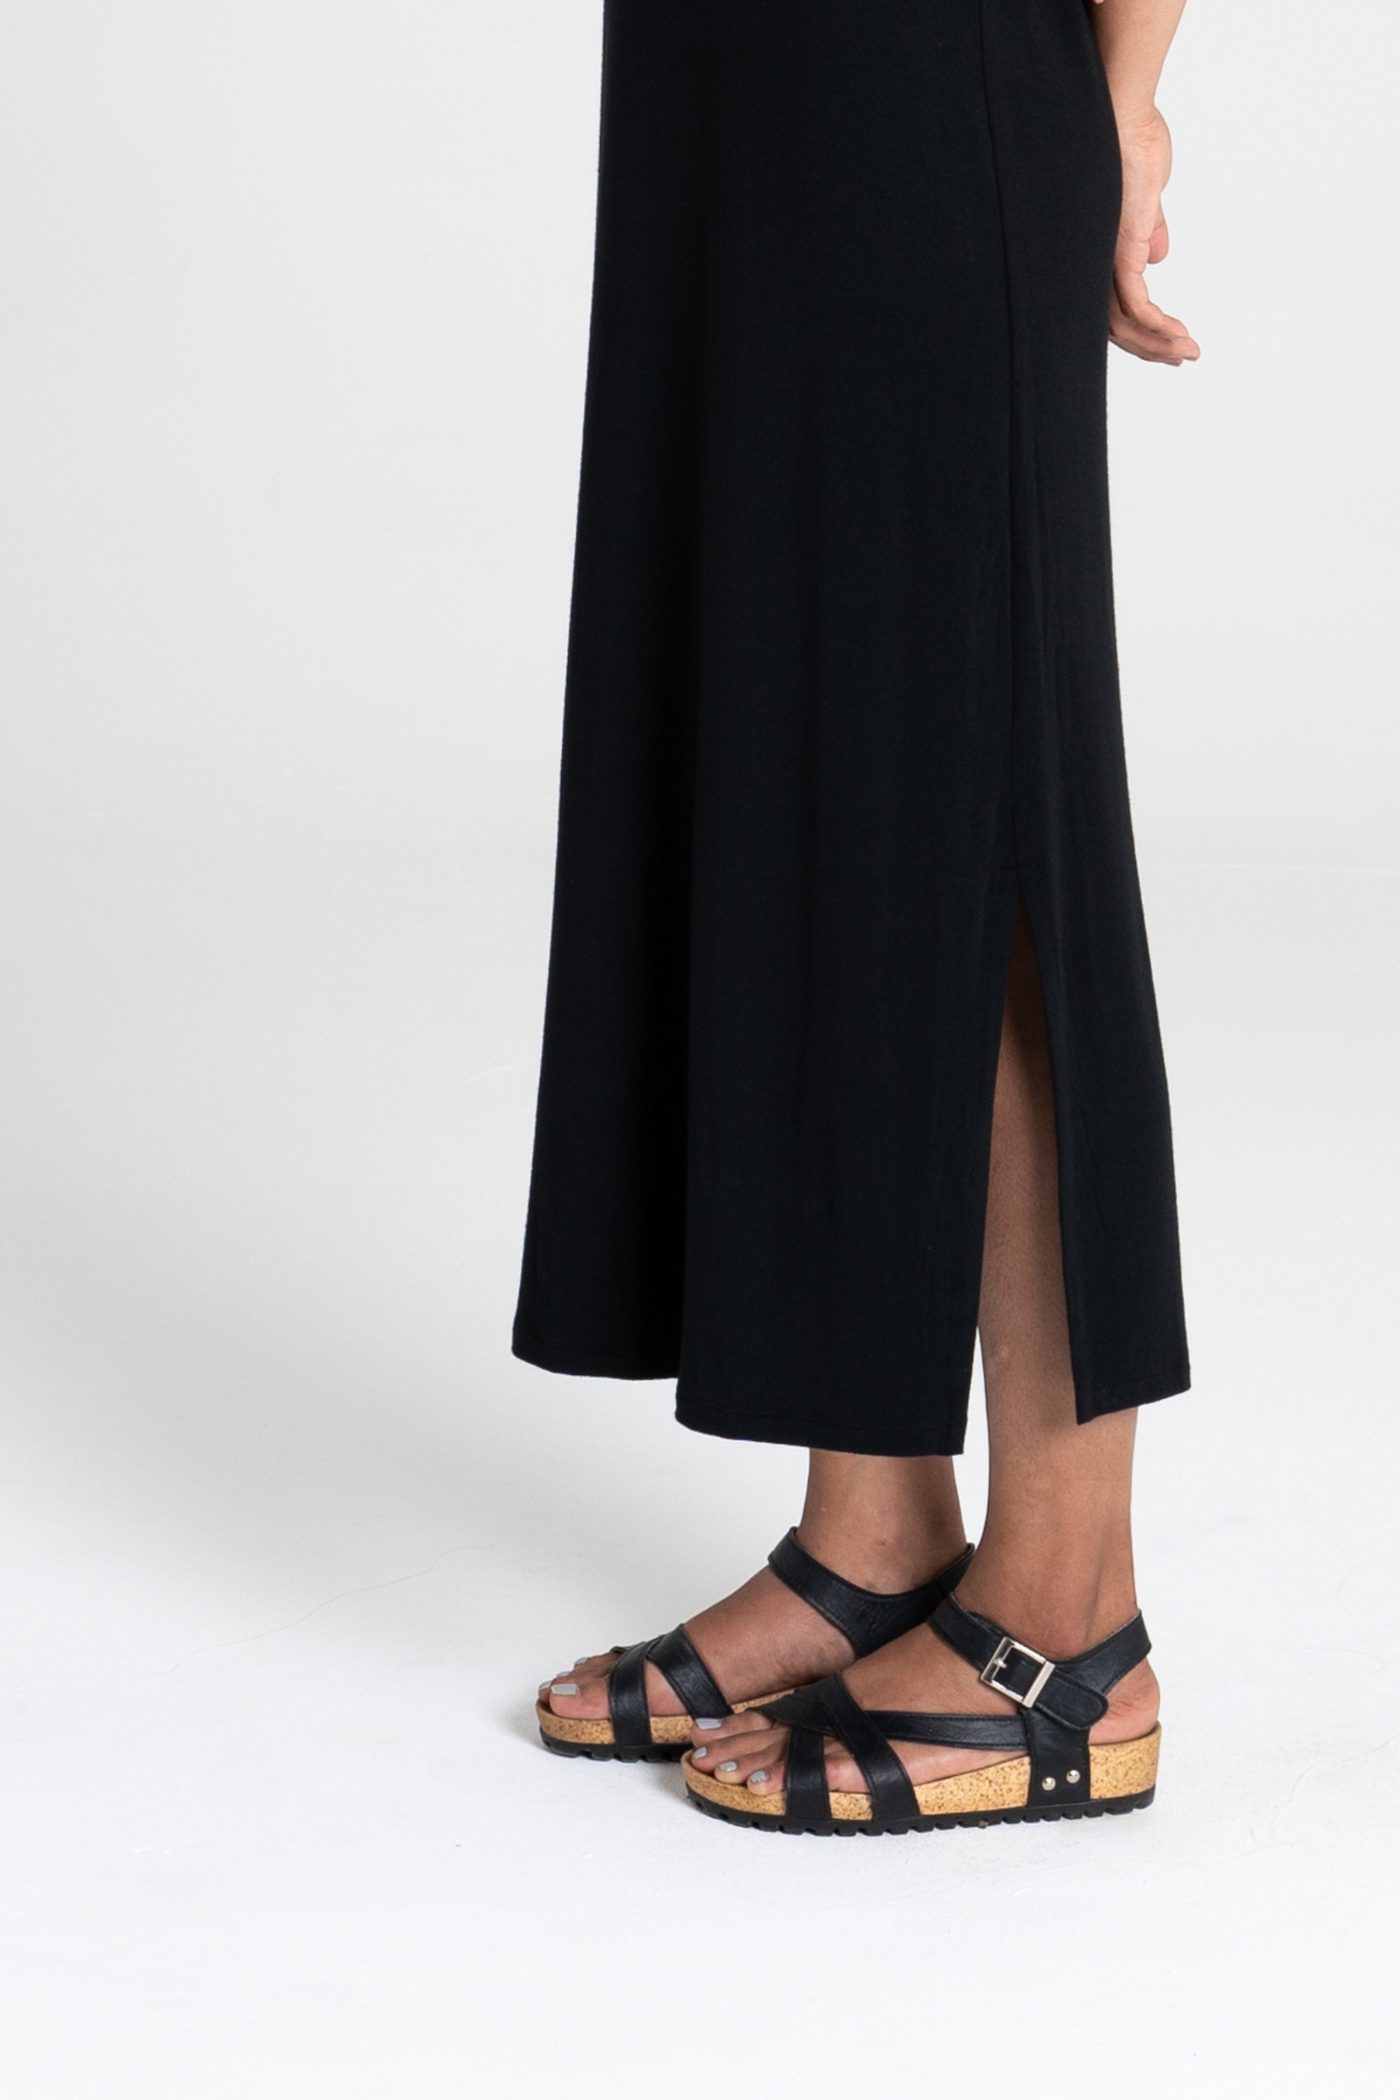 Singlet Dress in Black by Dorsu, available at ZERRIN with free Singapore shipping